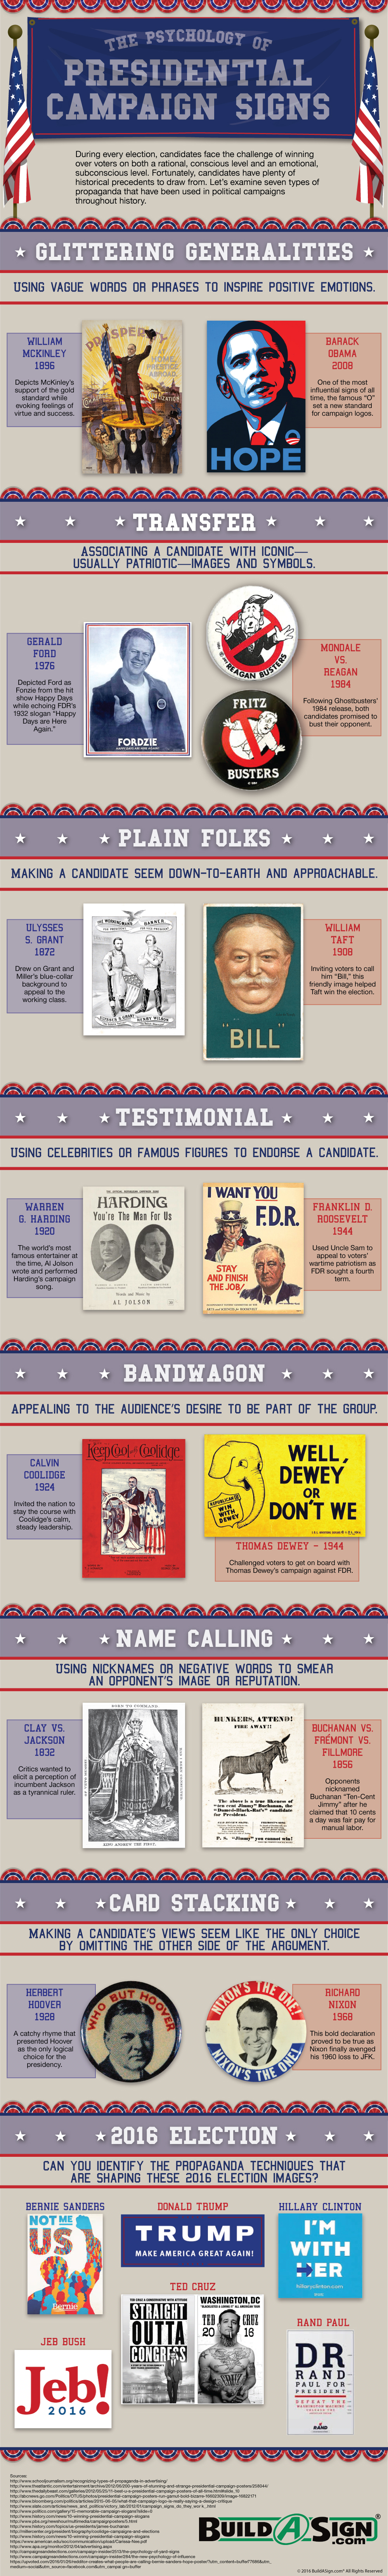 The Psychology of Presidential Campaign Signs